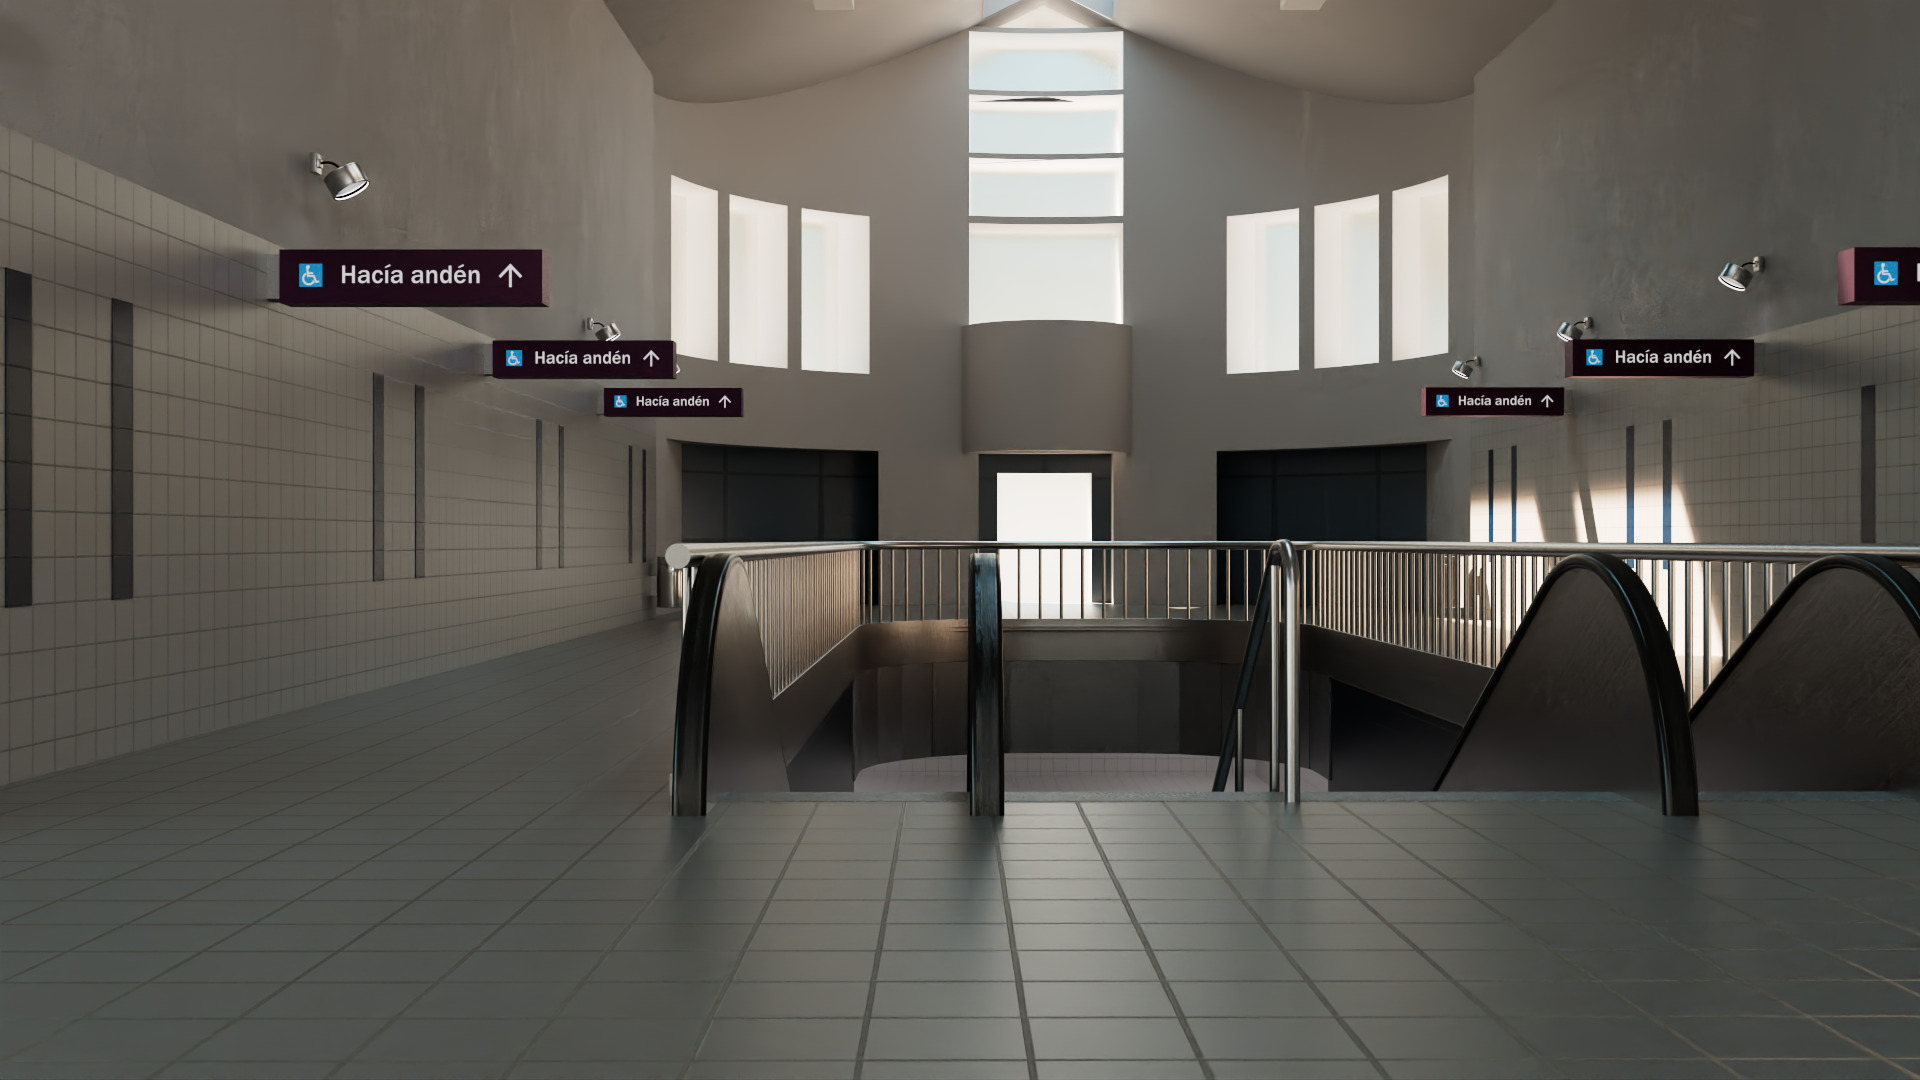 3D animation of train station ticketing